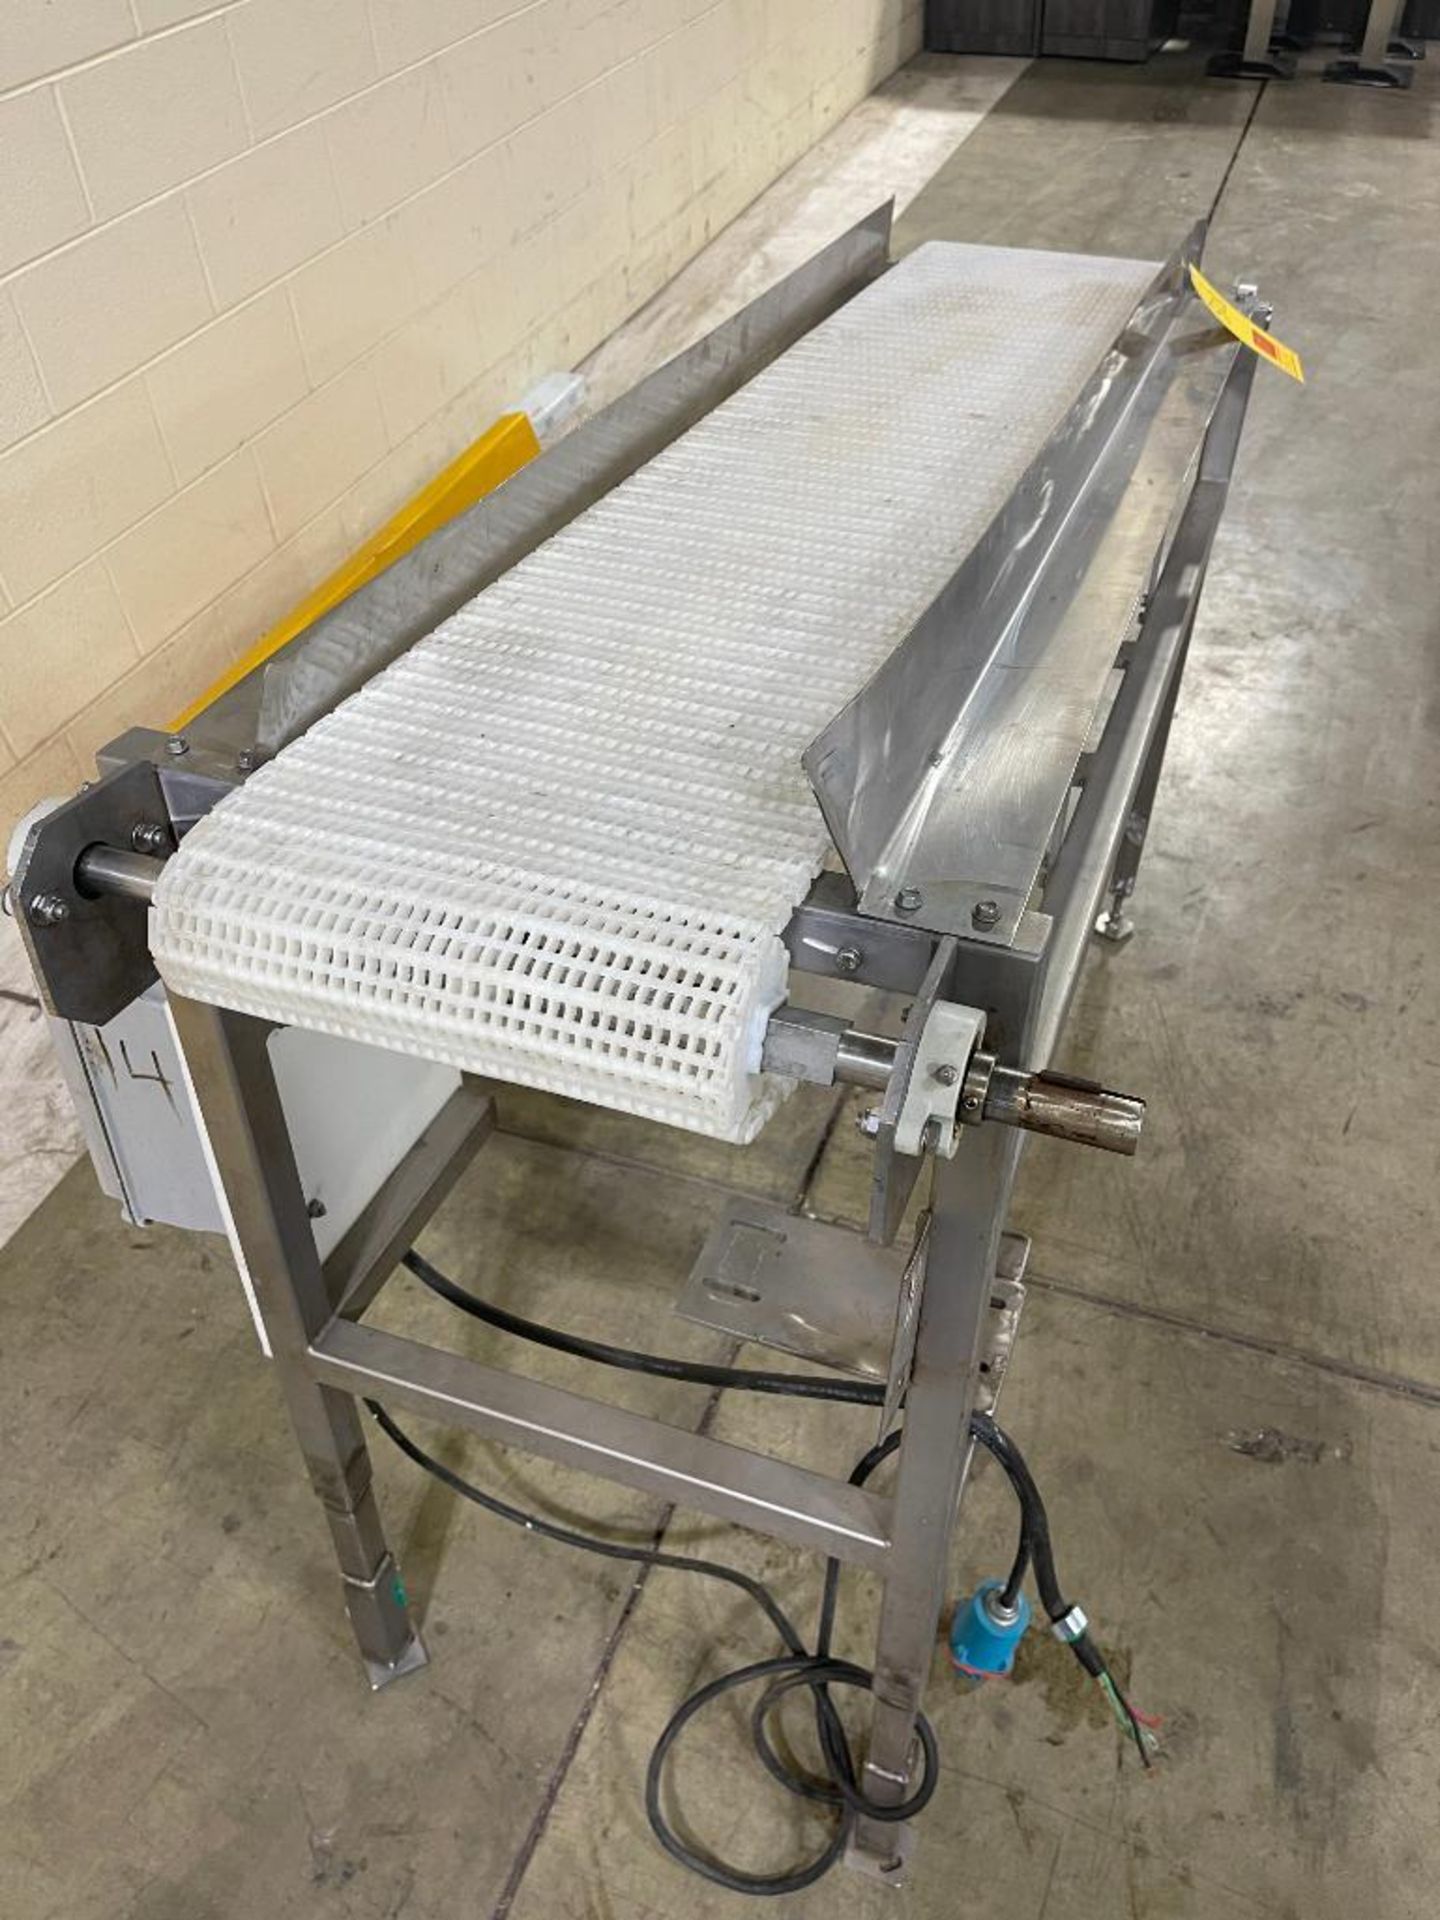 S/S Frame Conveyor with Belt and S/S Drive, 8' Length x 18" Width (Location: Denver, CO) - Image 3 of 4